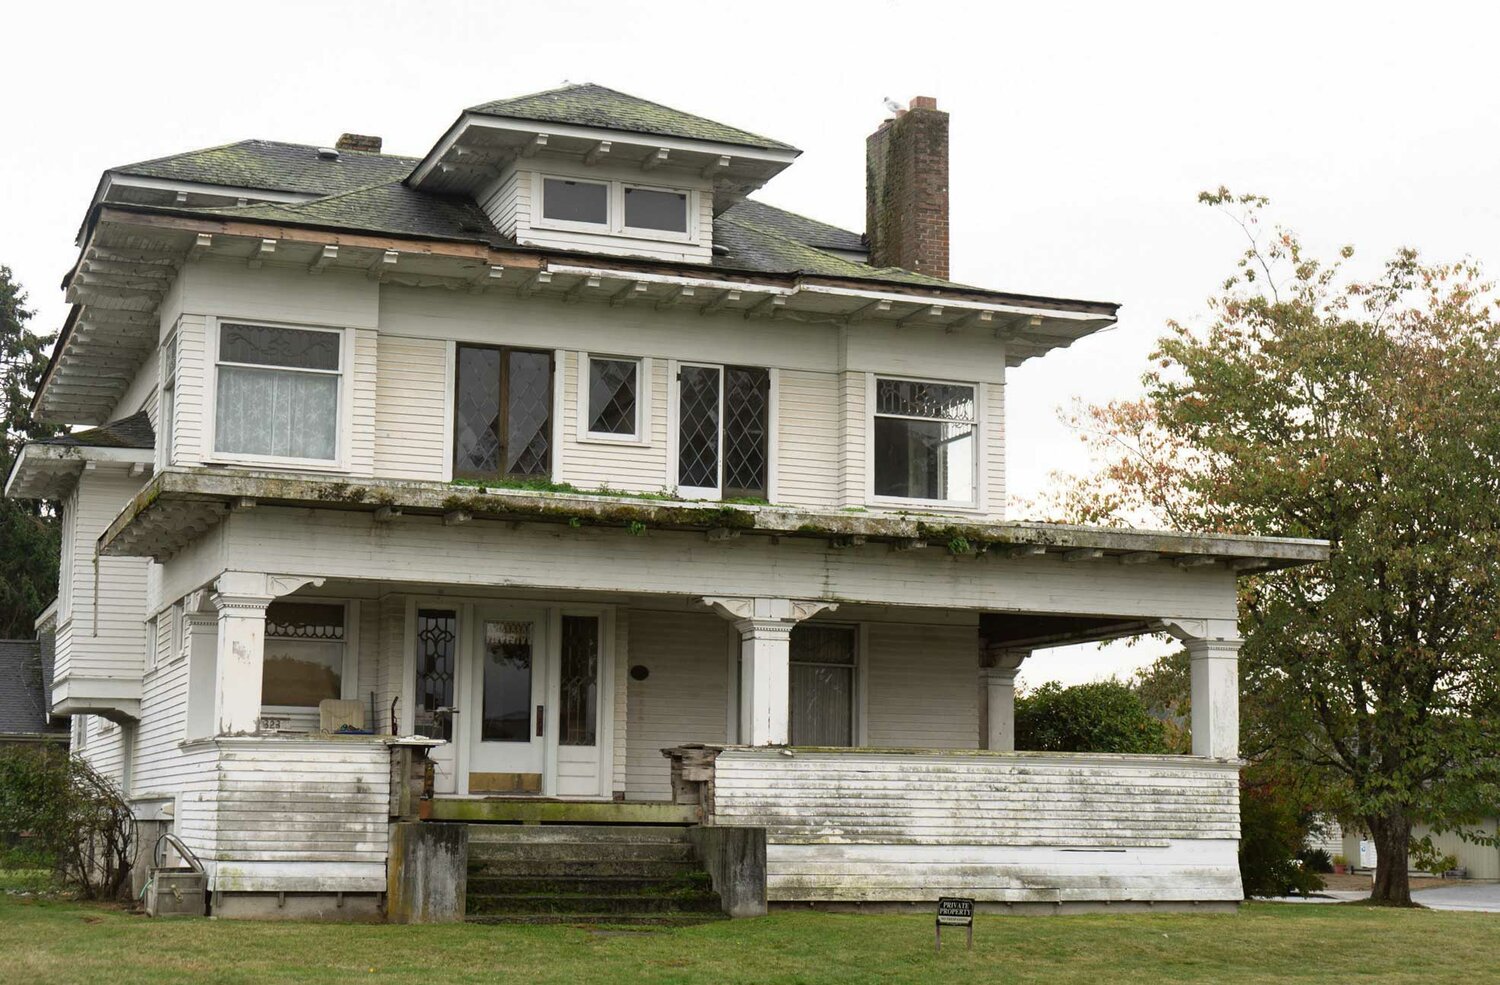 The exterior of the historic Wolten family home, 110 years after it was built. Blaine residents Rachel and Wayne Vezzetti bought the house earlier this year in the hopes of fully restoring it to its original use as a family home.